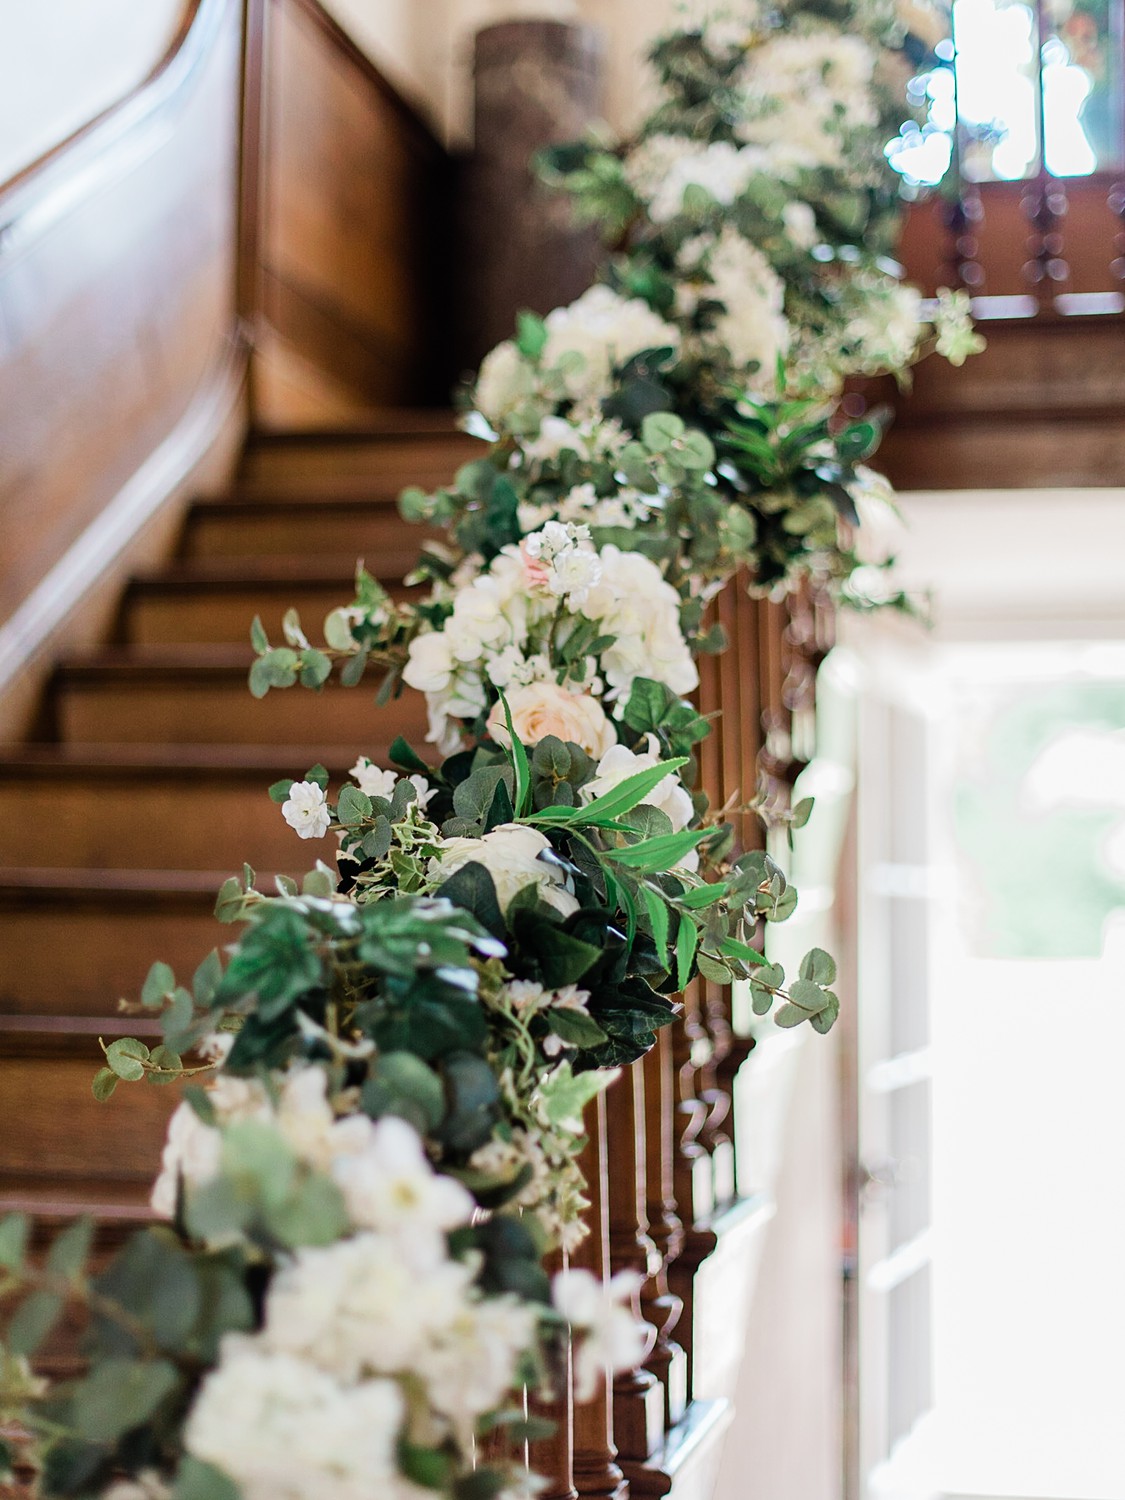 Roses, hydrangeas and white blossoms mixed with ivy and eucalyptus are entwined around the bannister of a wooden Georgian bannister